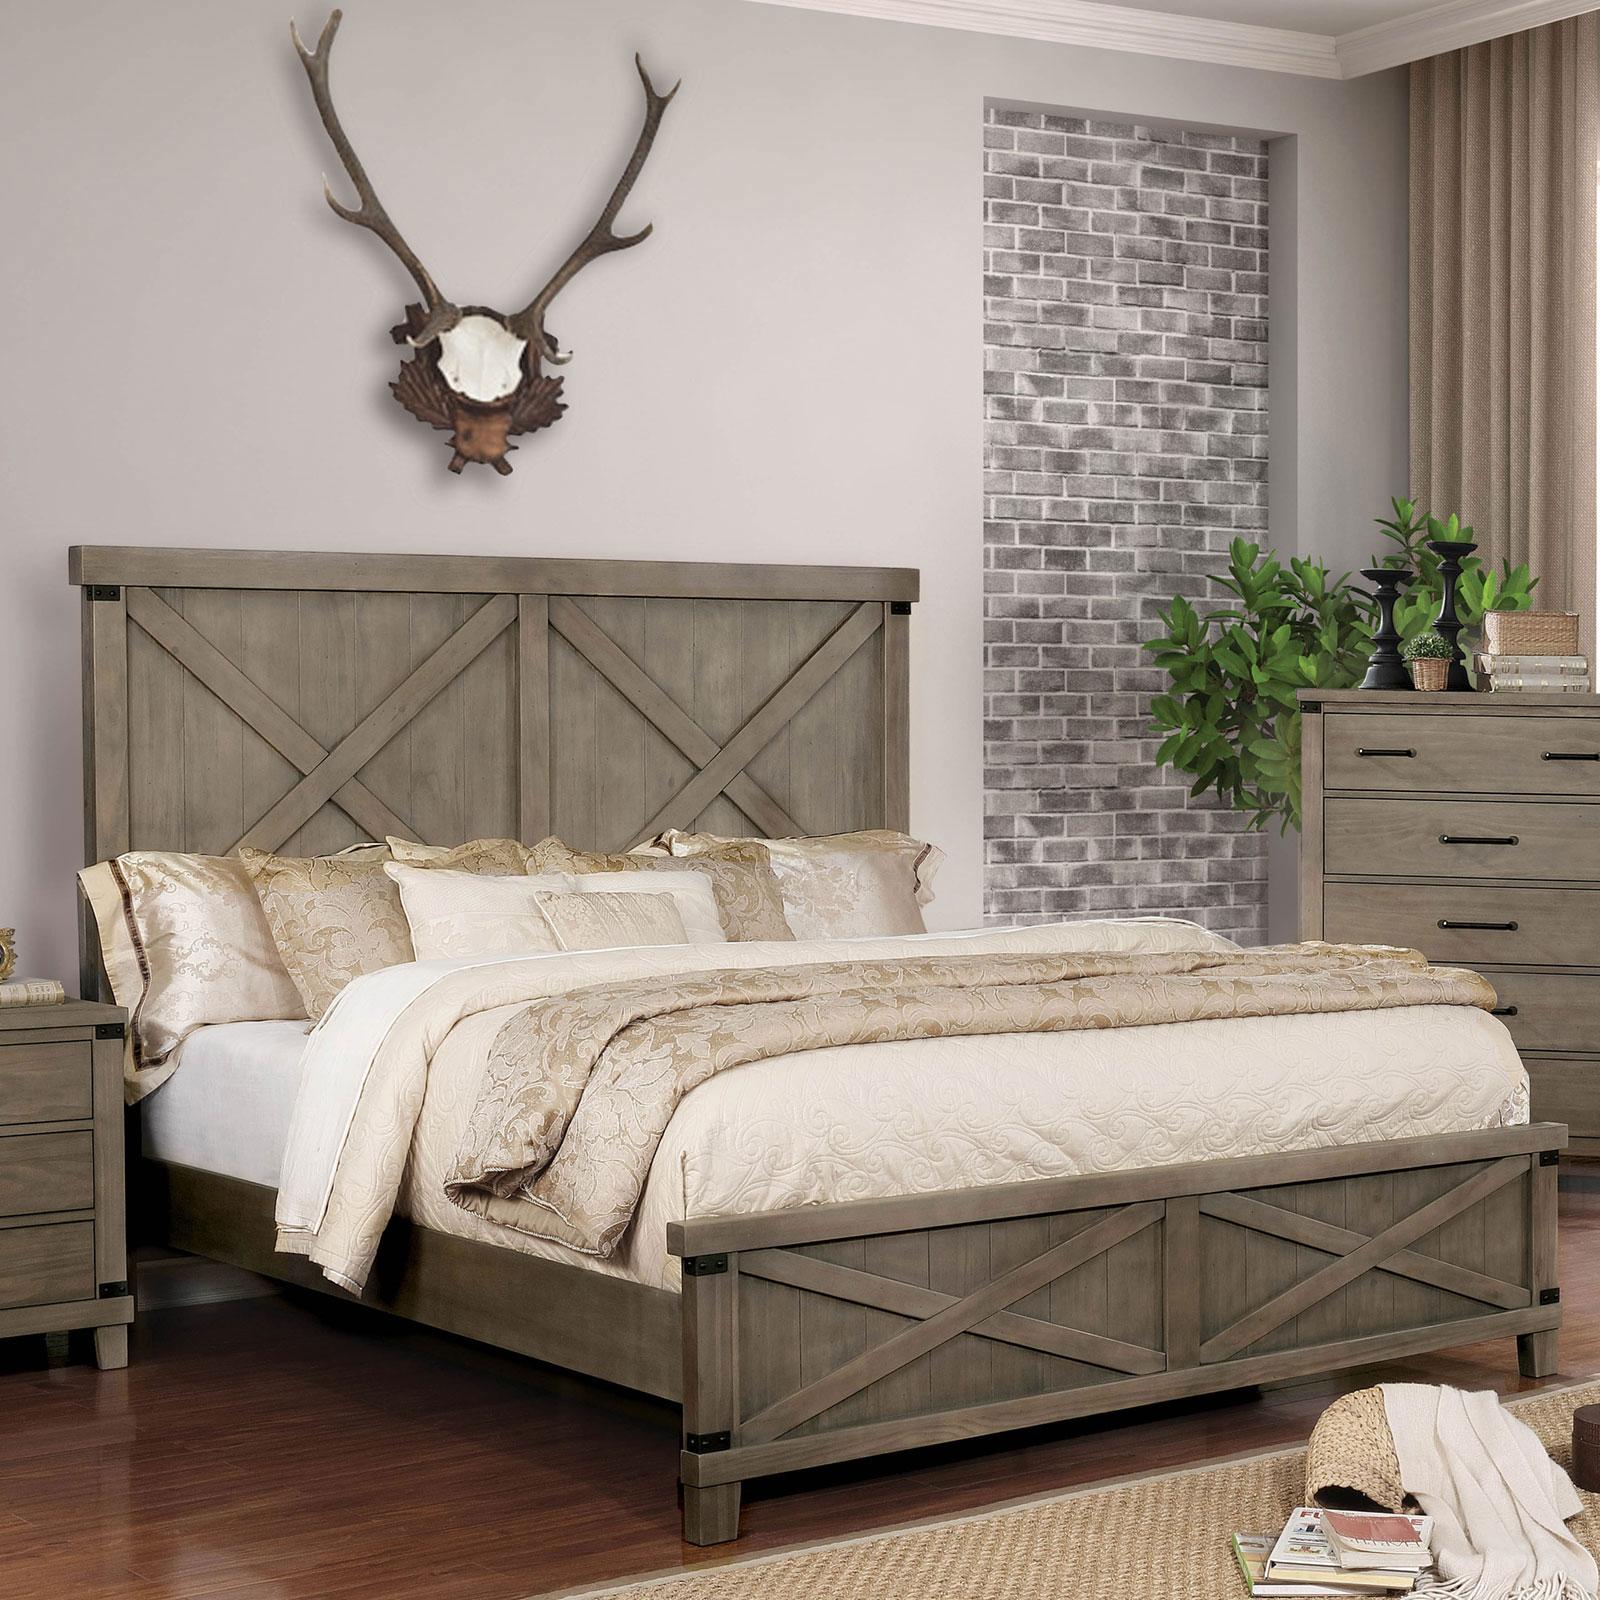 

    
Rustic Wood CAL King Bedroom Set 5 w/Chest in Gray Bianca by Furniture of America
